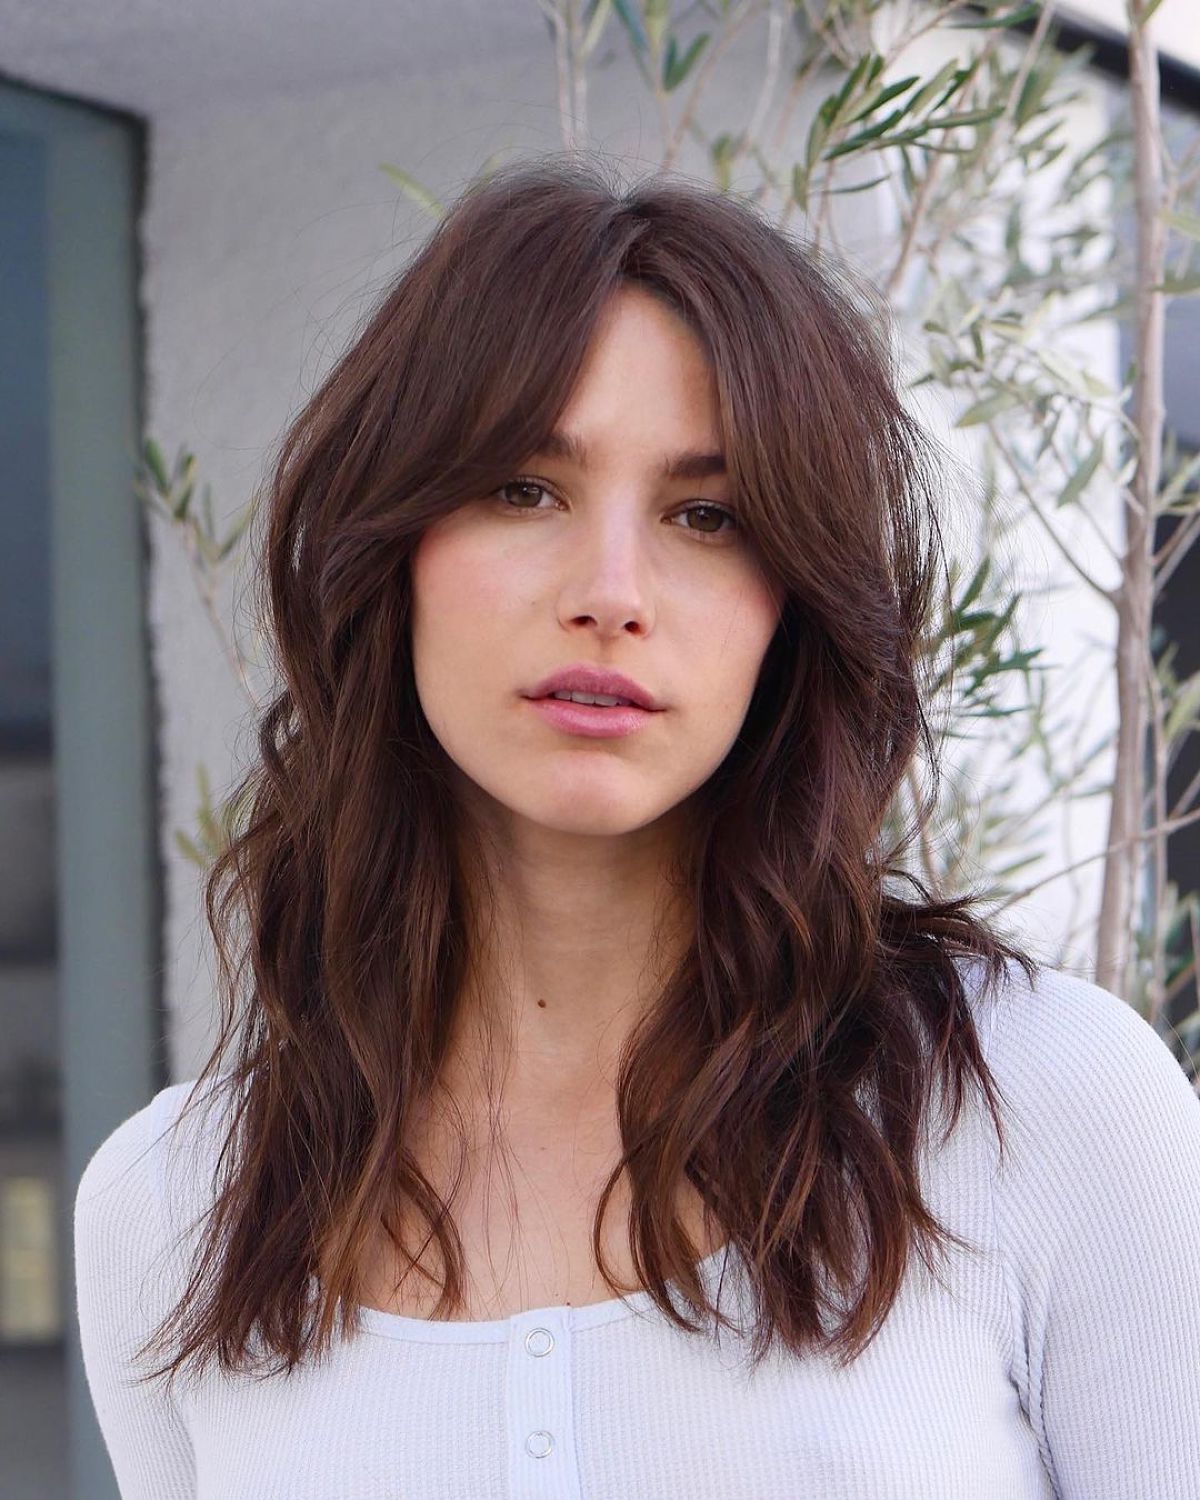 35 Coolest Shoulder Length Hair With Curtain Bangs You've Gotta See Within Newest Medium Hair With Long Curtain Bangs (View 17 of 18)